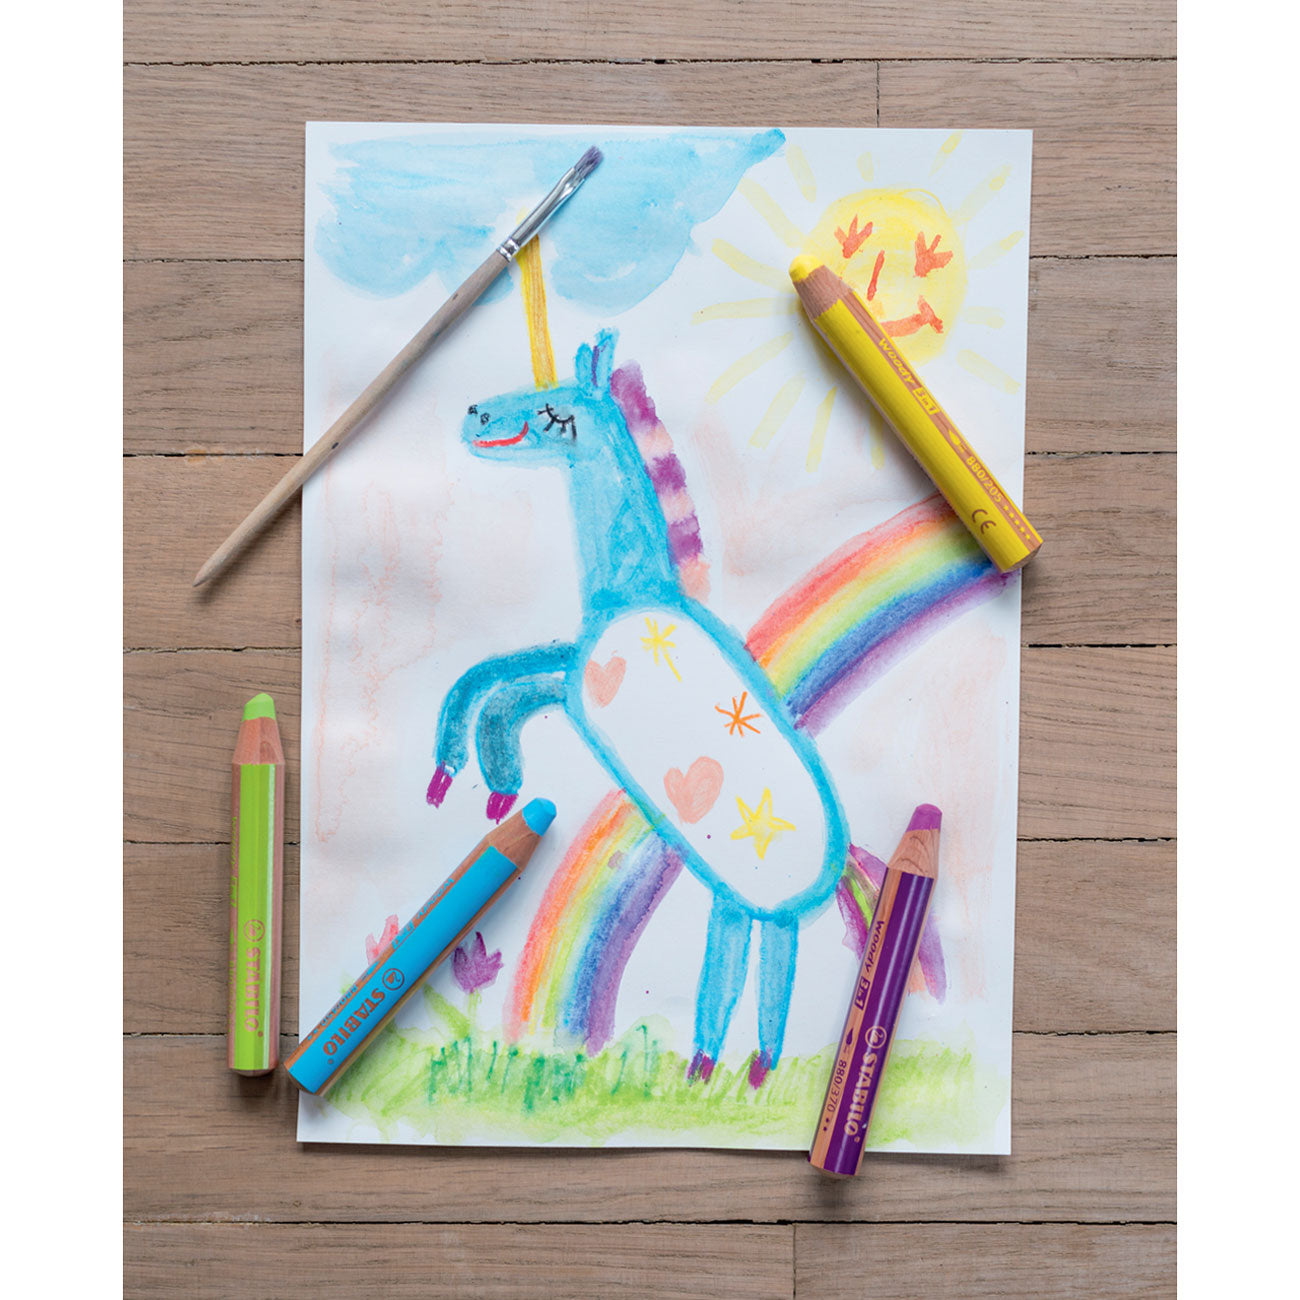 Wooden floor background with a watercolor of a unicorn rearing in front of a rainbow with a happy sun in the sky. 4 Stabilo pencils in yellow, purple, blue, and green placed on top of the picture along with a paintbrush.